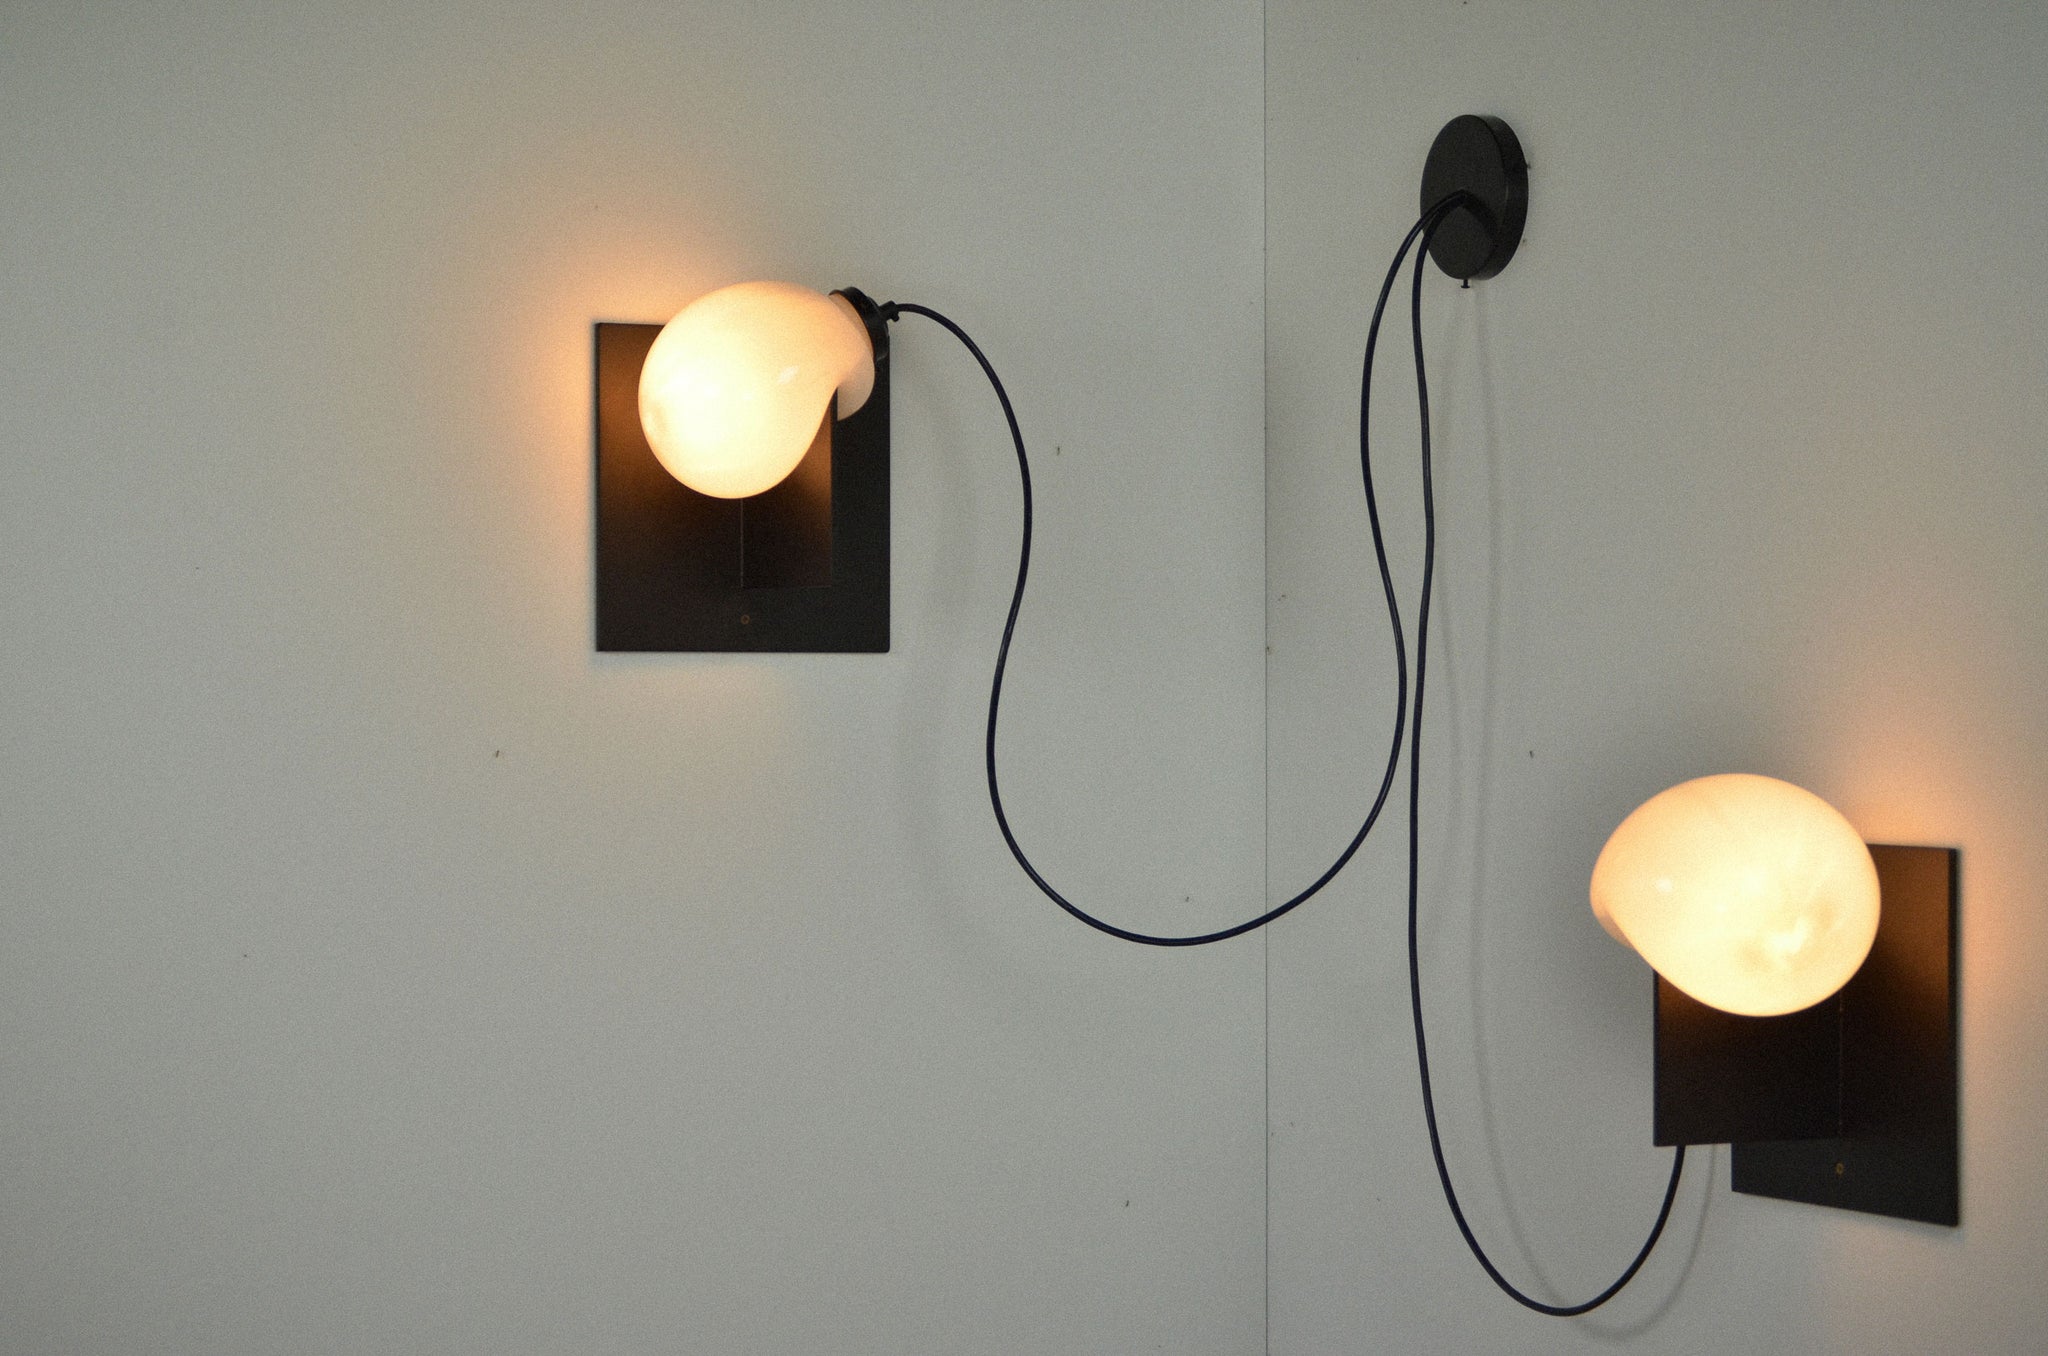 Two Bloop Sconces mounted on the wall in the corner